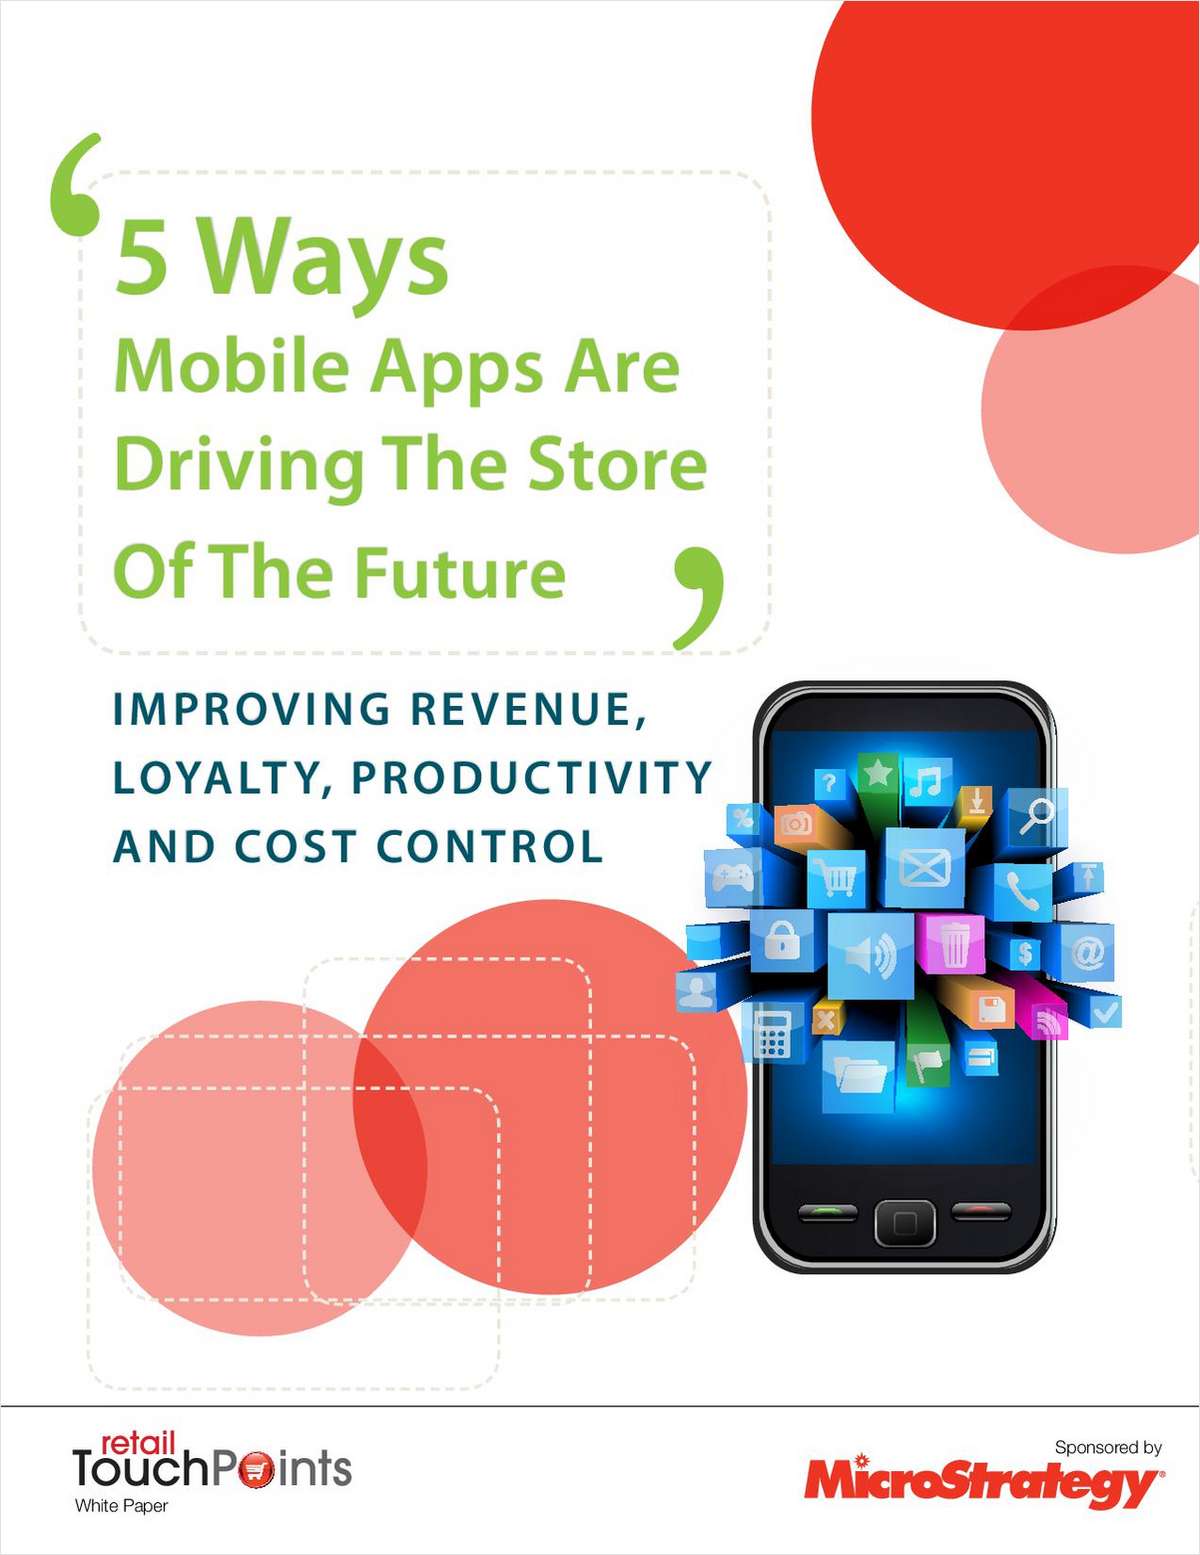 5 Ways Mobile Apps Are Driving the Store of the Future